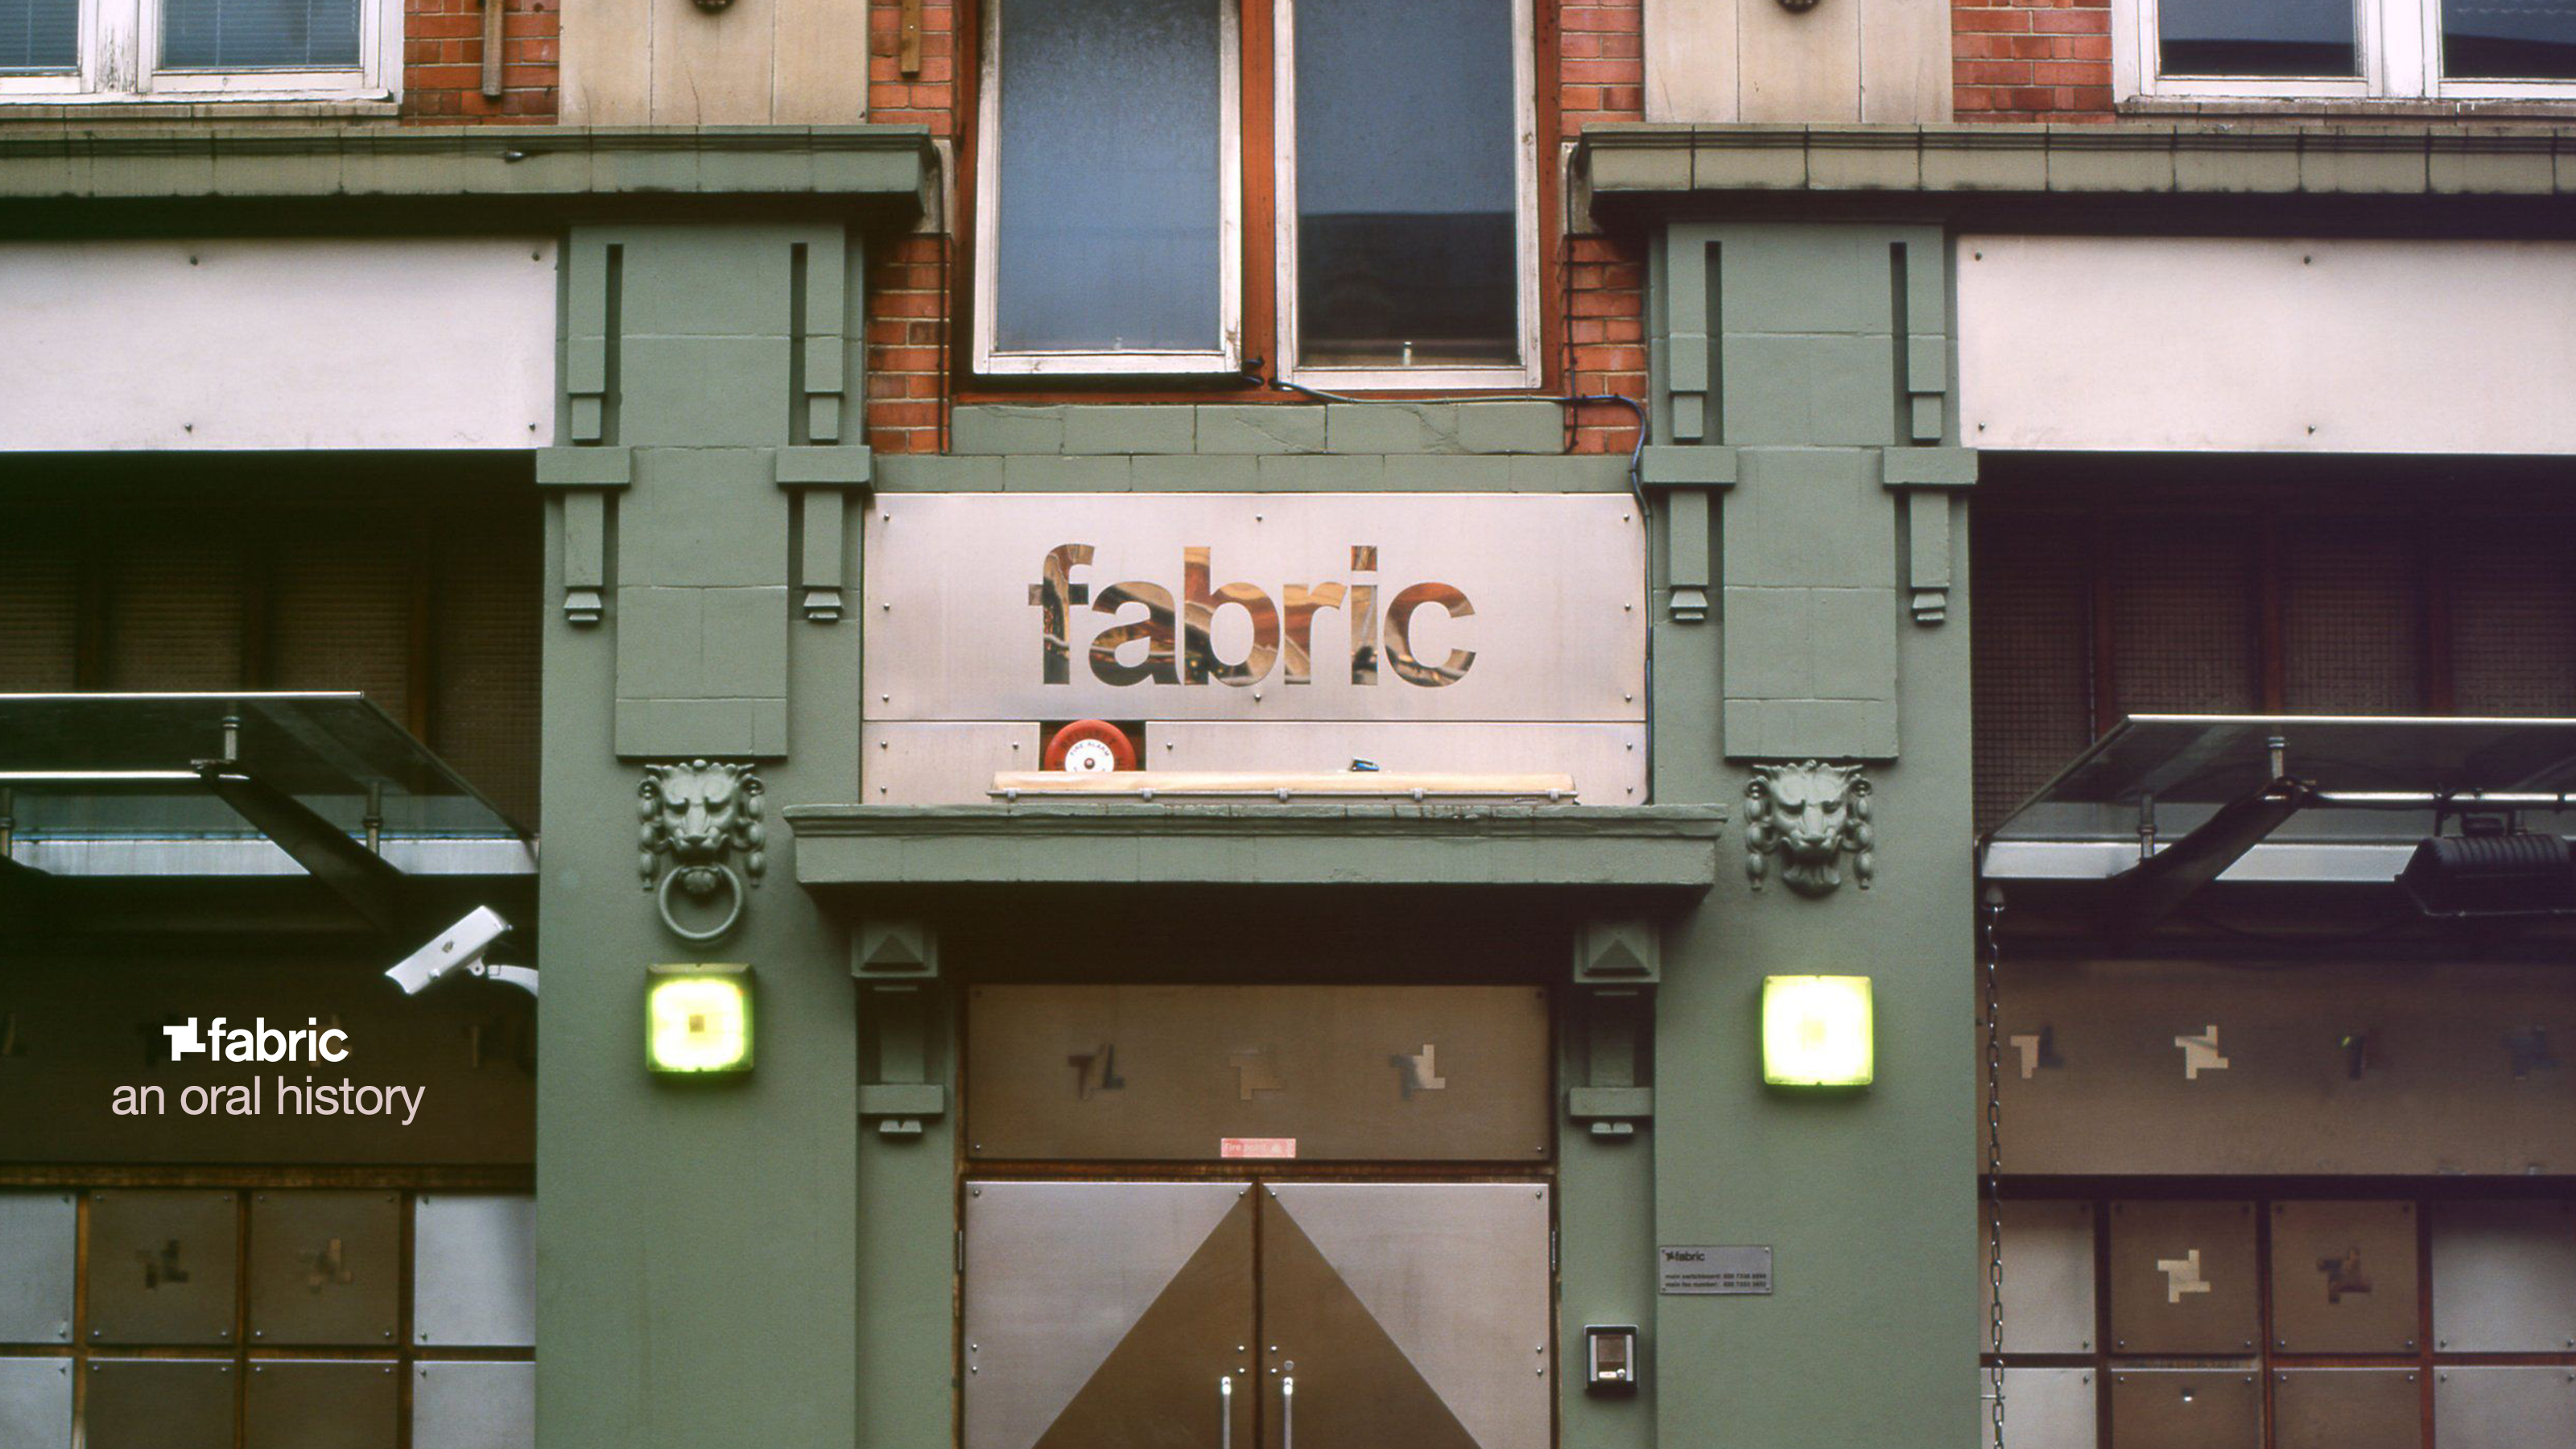 fabric: An oral history